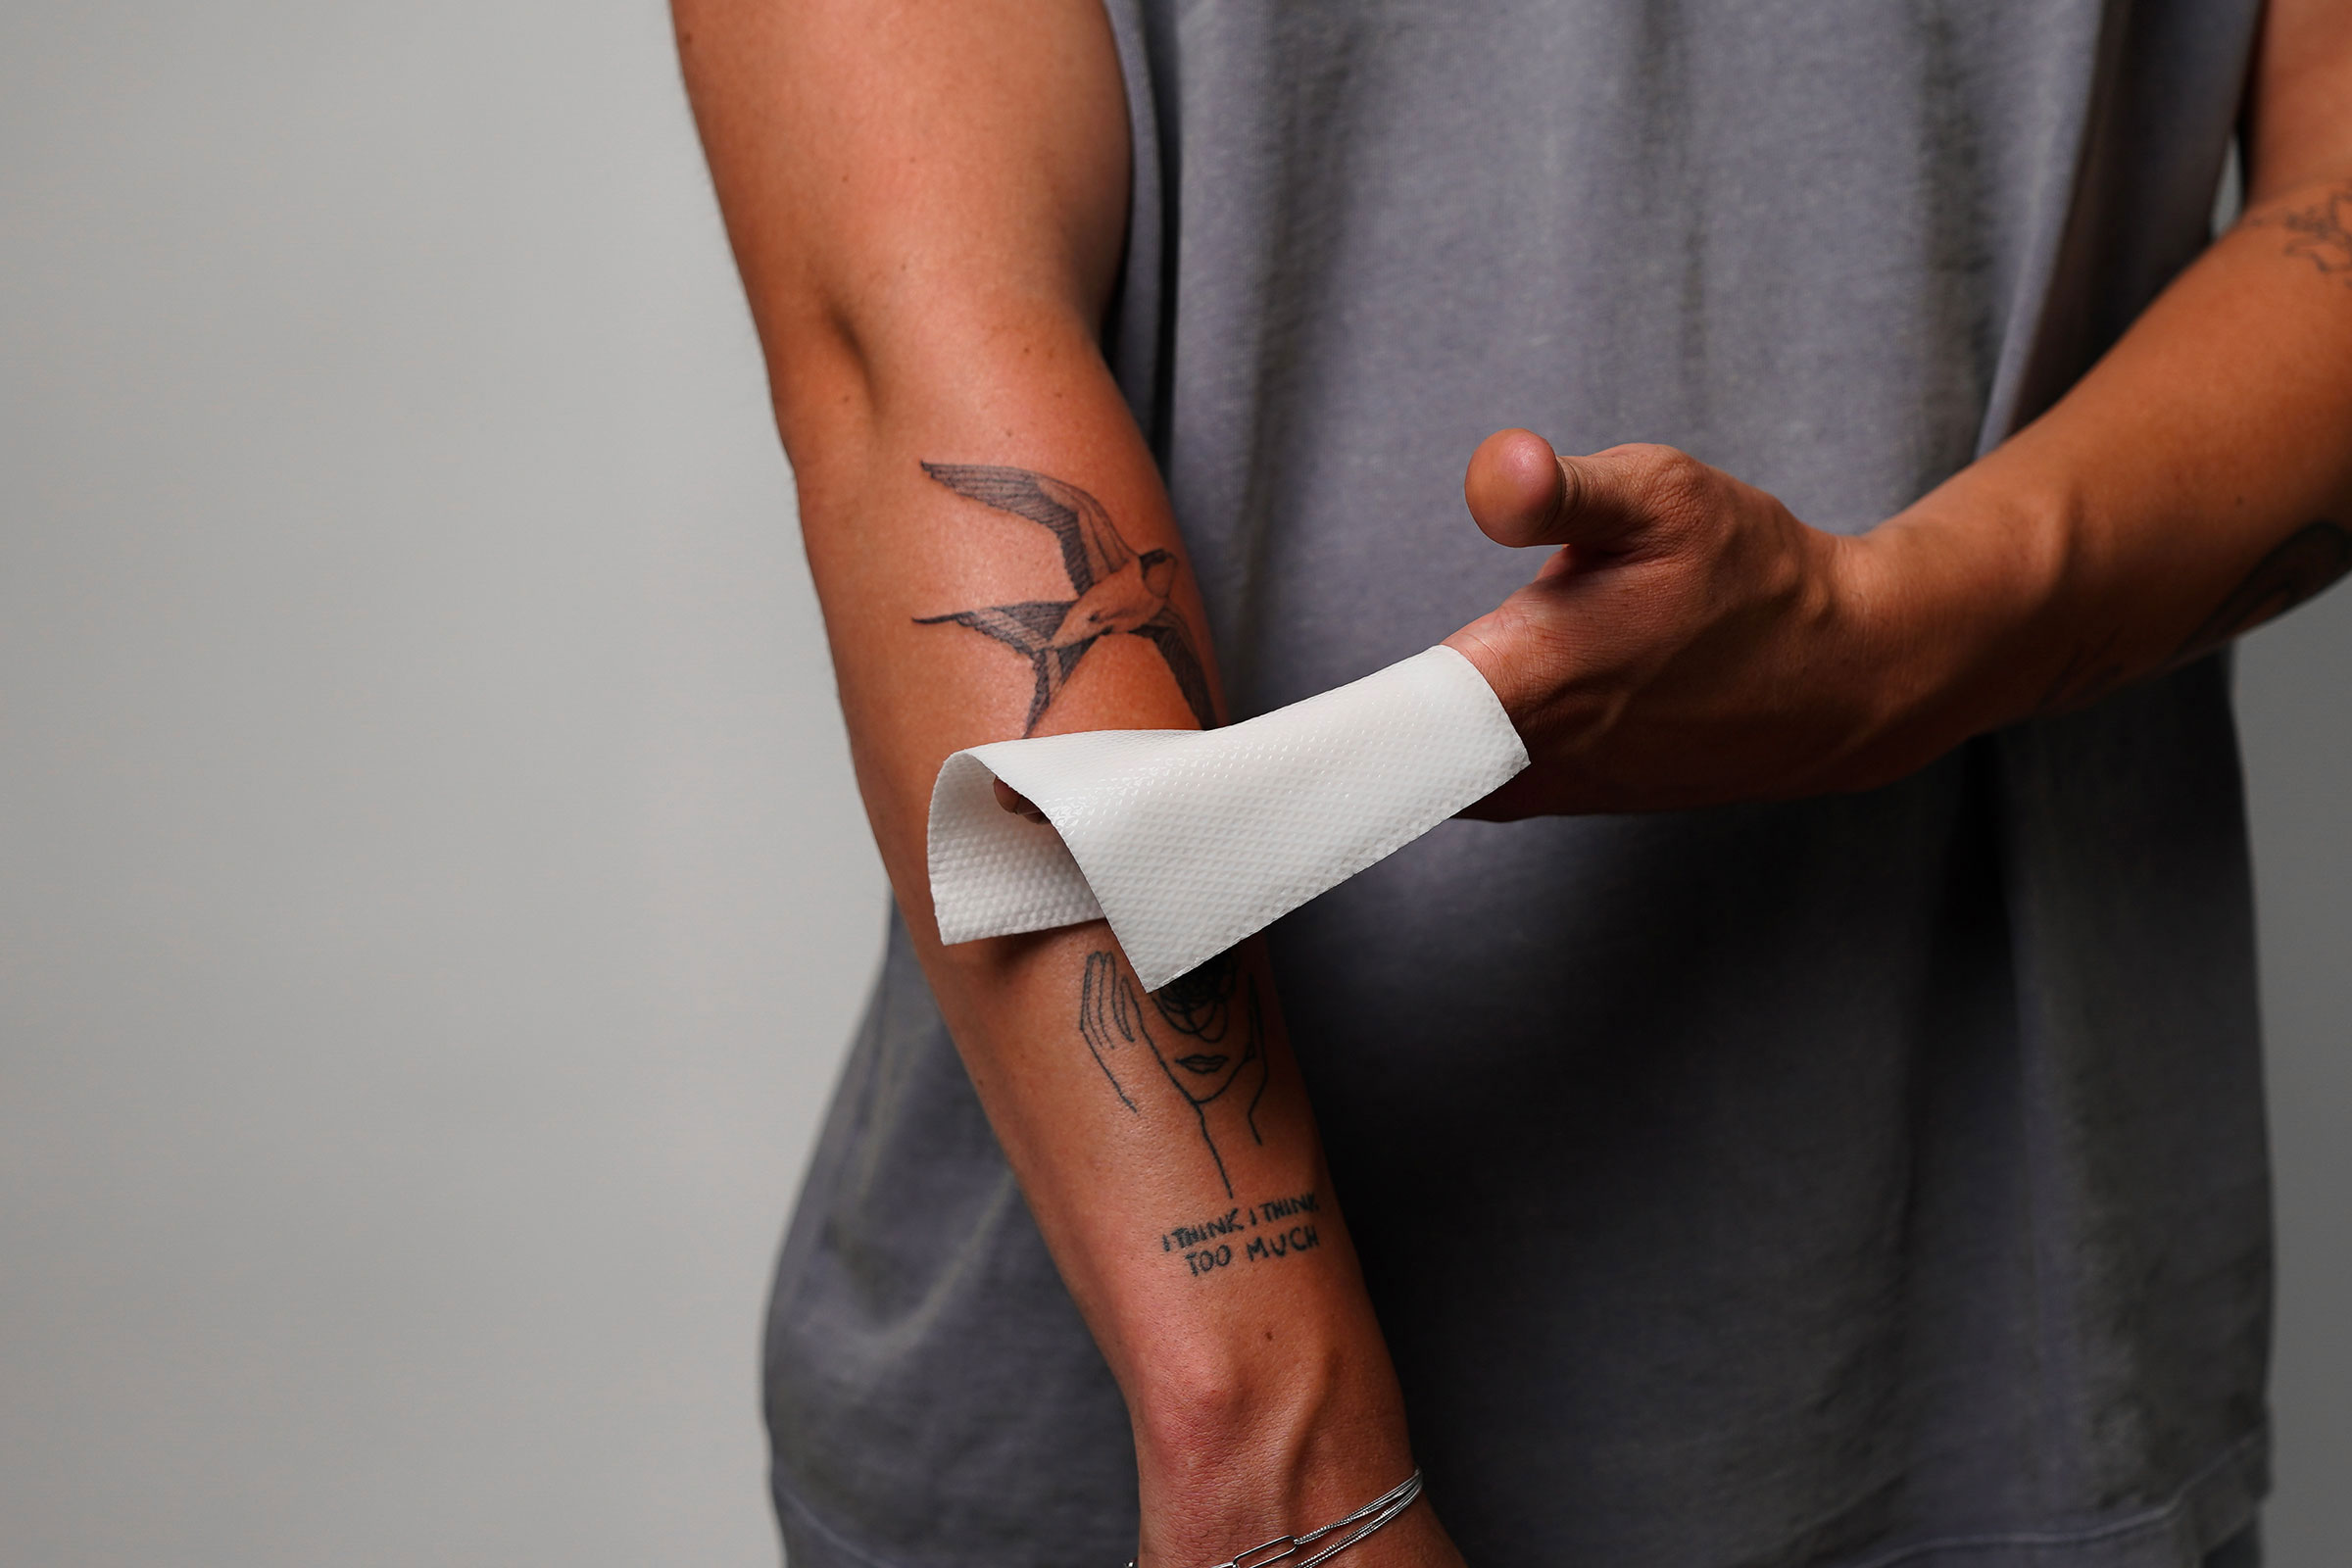 Patch sleeve | Sleeve tattoos, Small tattoos, Hand tattoos for guys